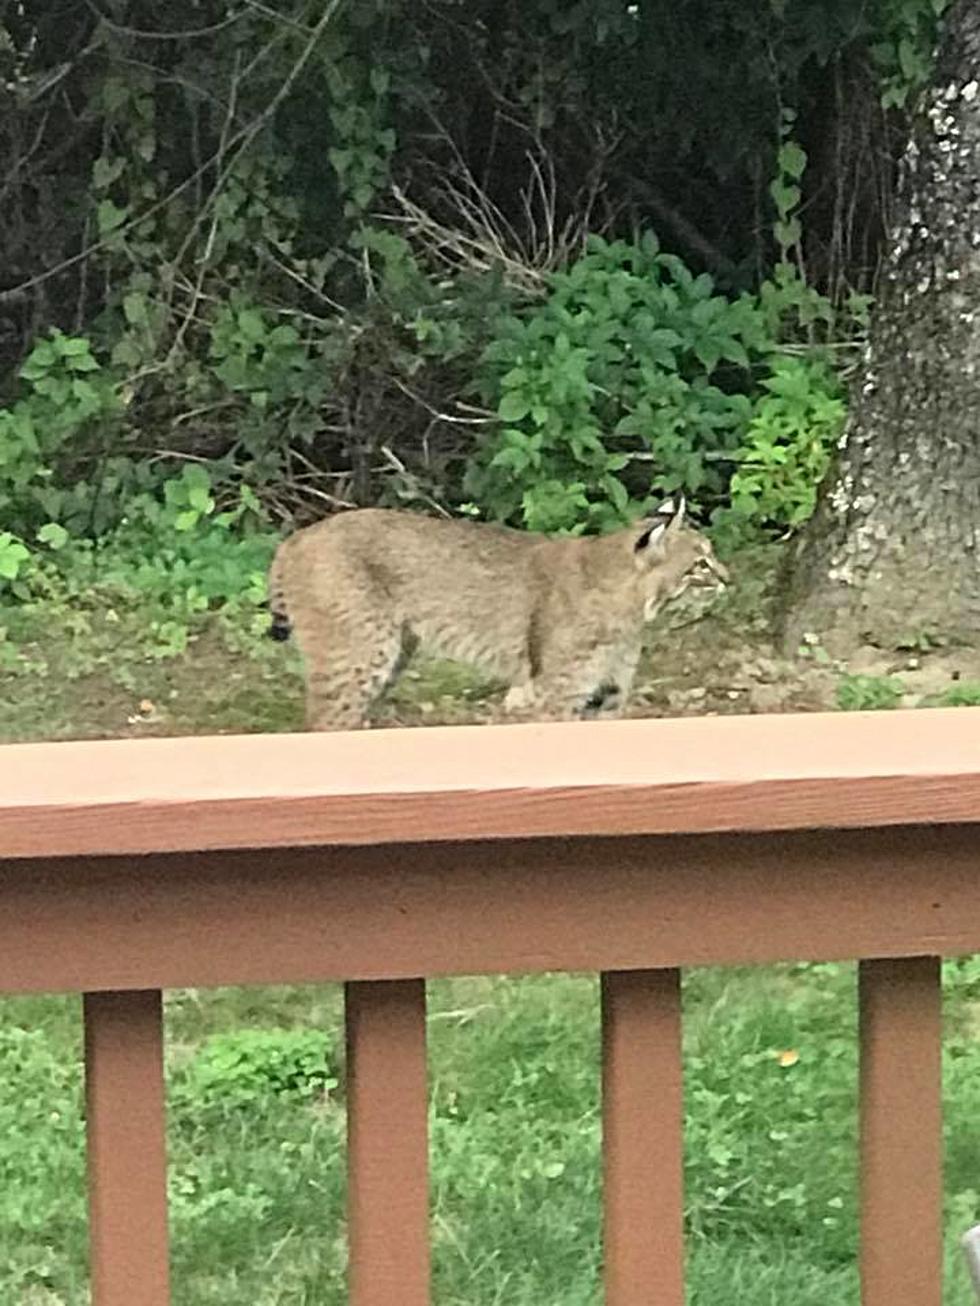 Bobcat Warning Issued After 1 Found Near Hudson Valley Home